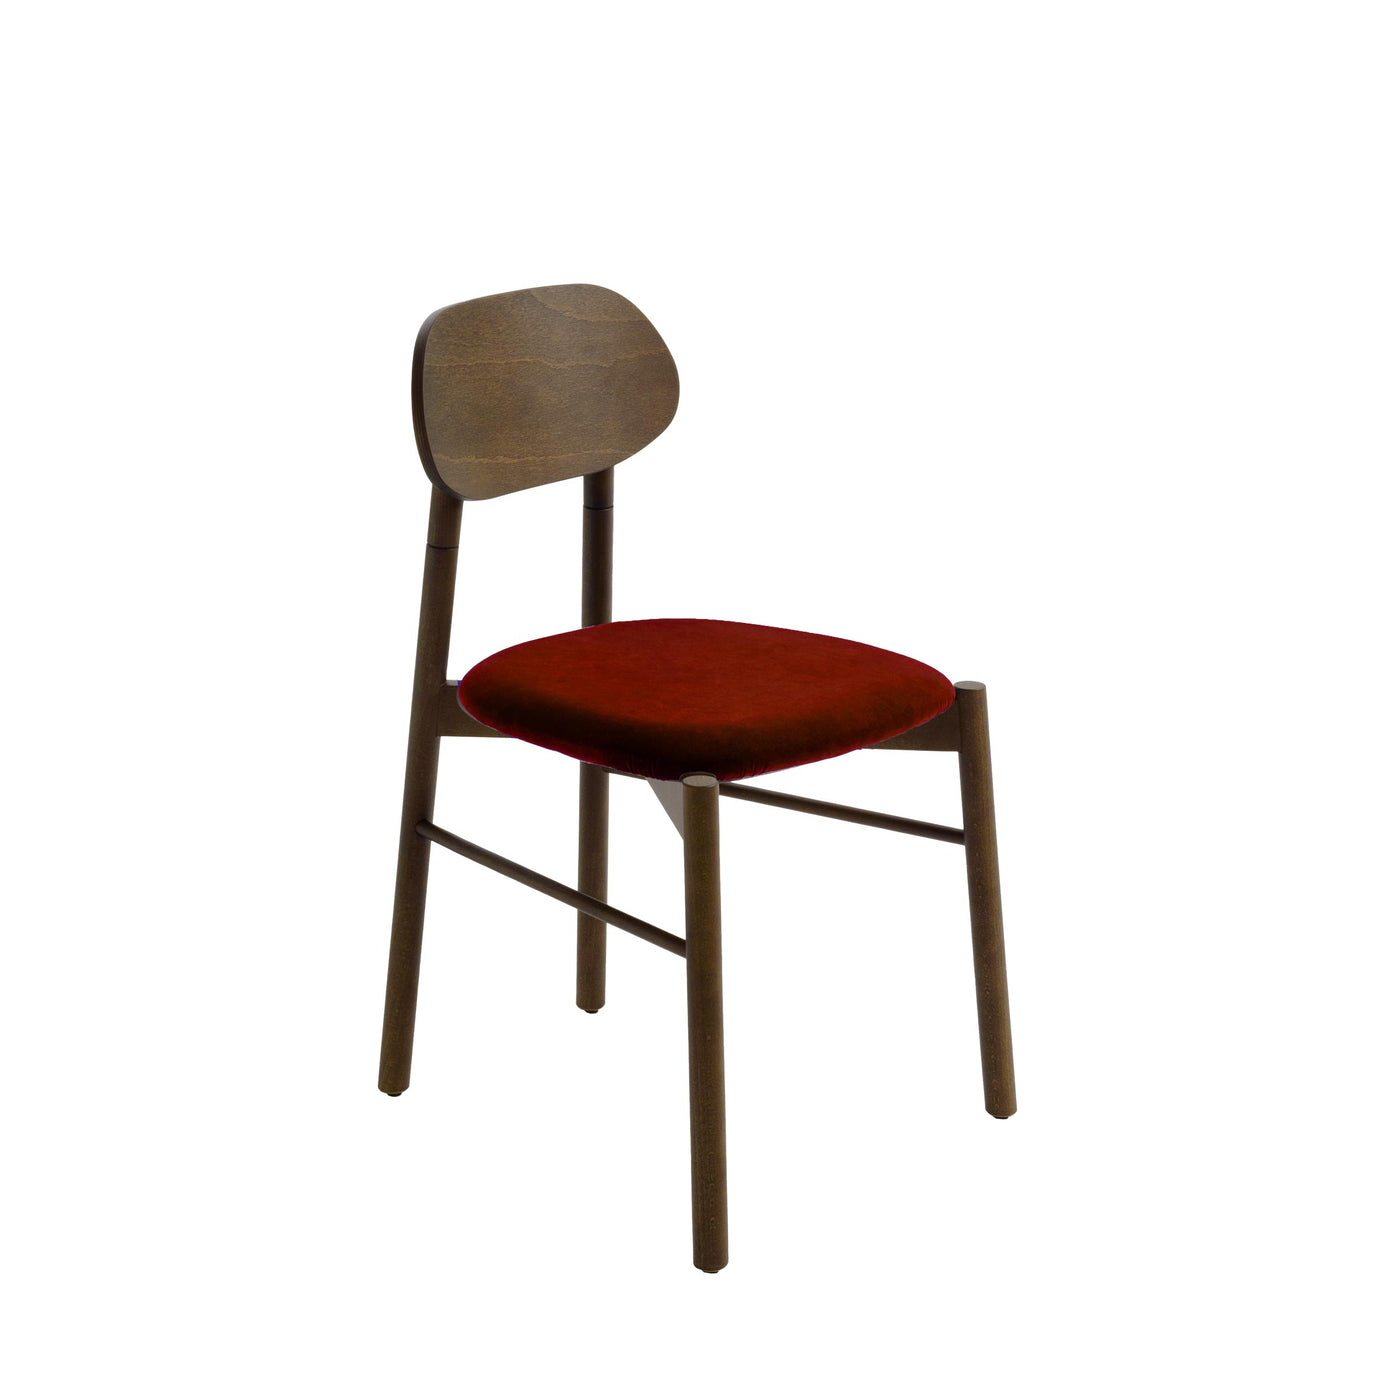 Upholstered Dining Chair BOKKEN by Bellavista + Piccini for Colé Italia 013